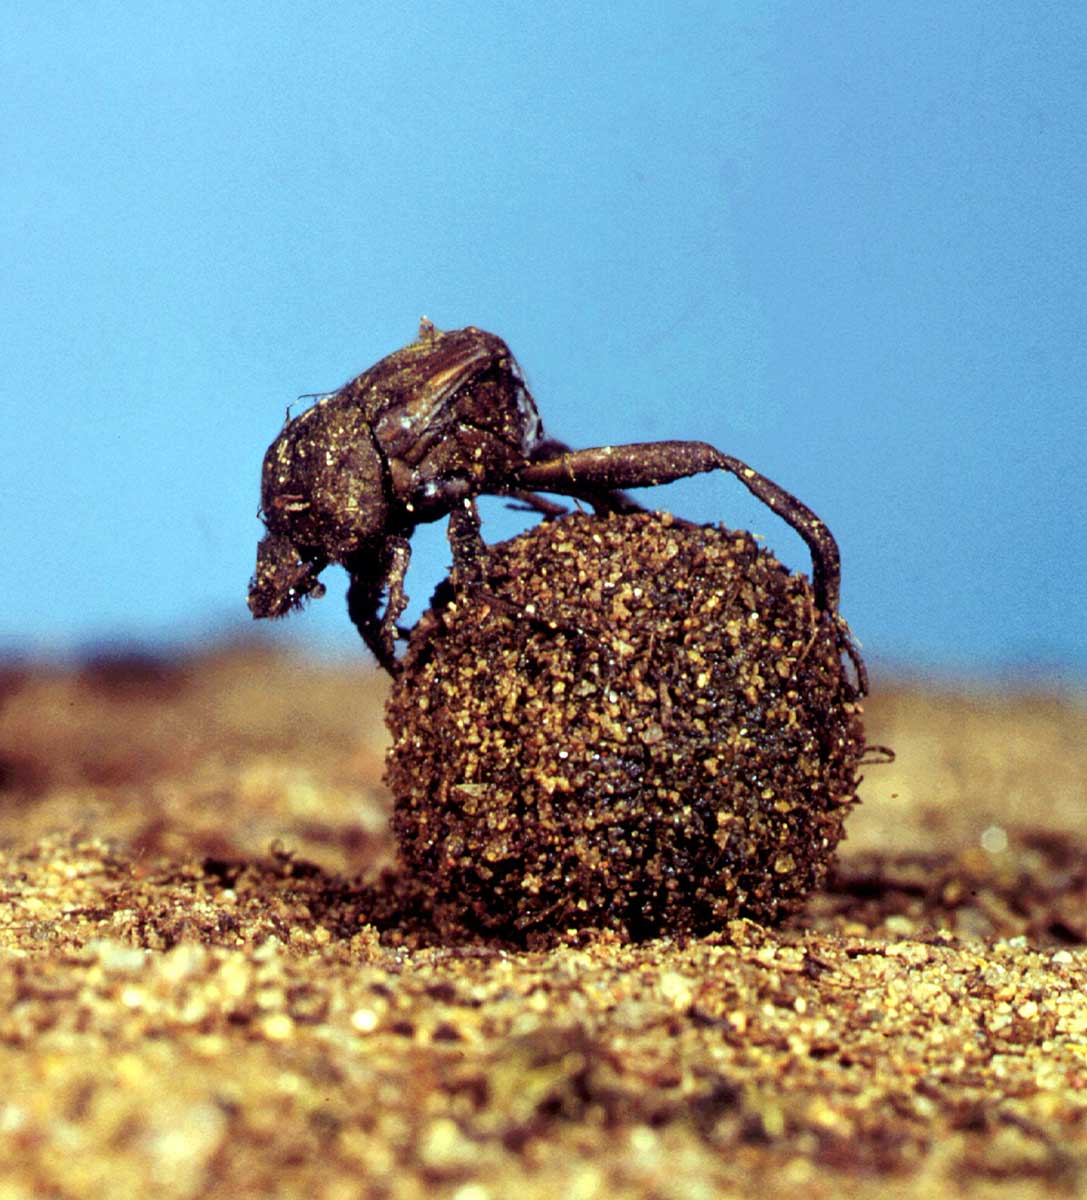 A colour photograph of a close-up shot of a dung beetle.